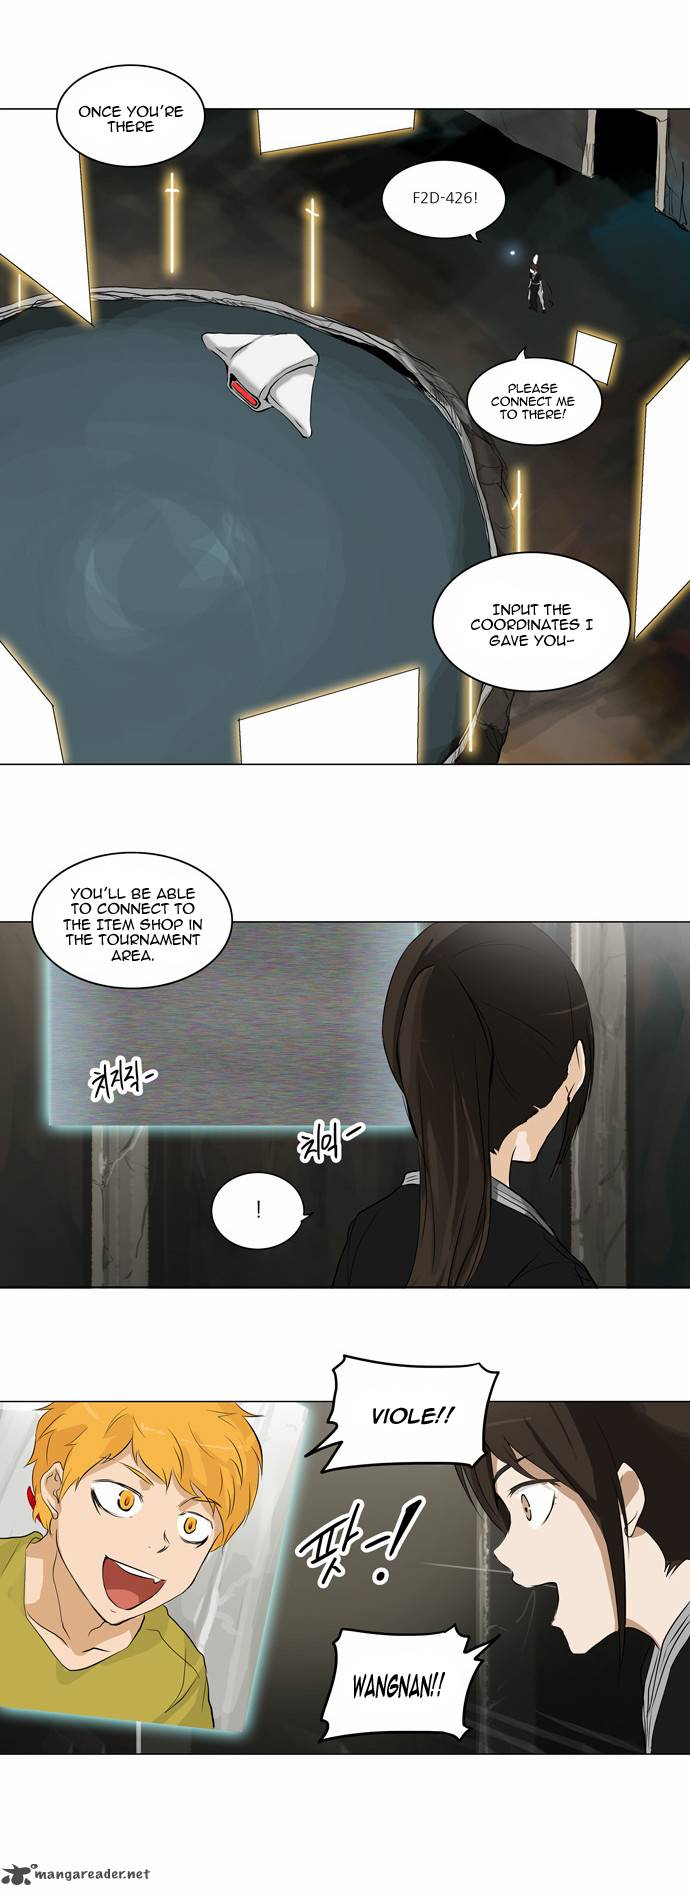 Tower Of God 172 22